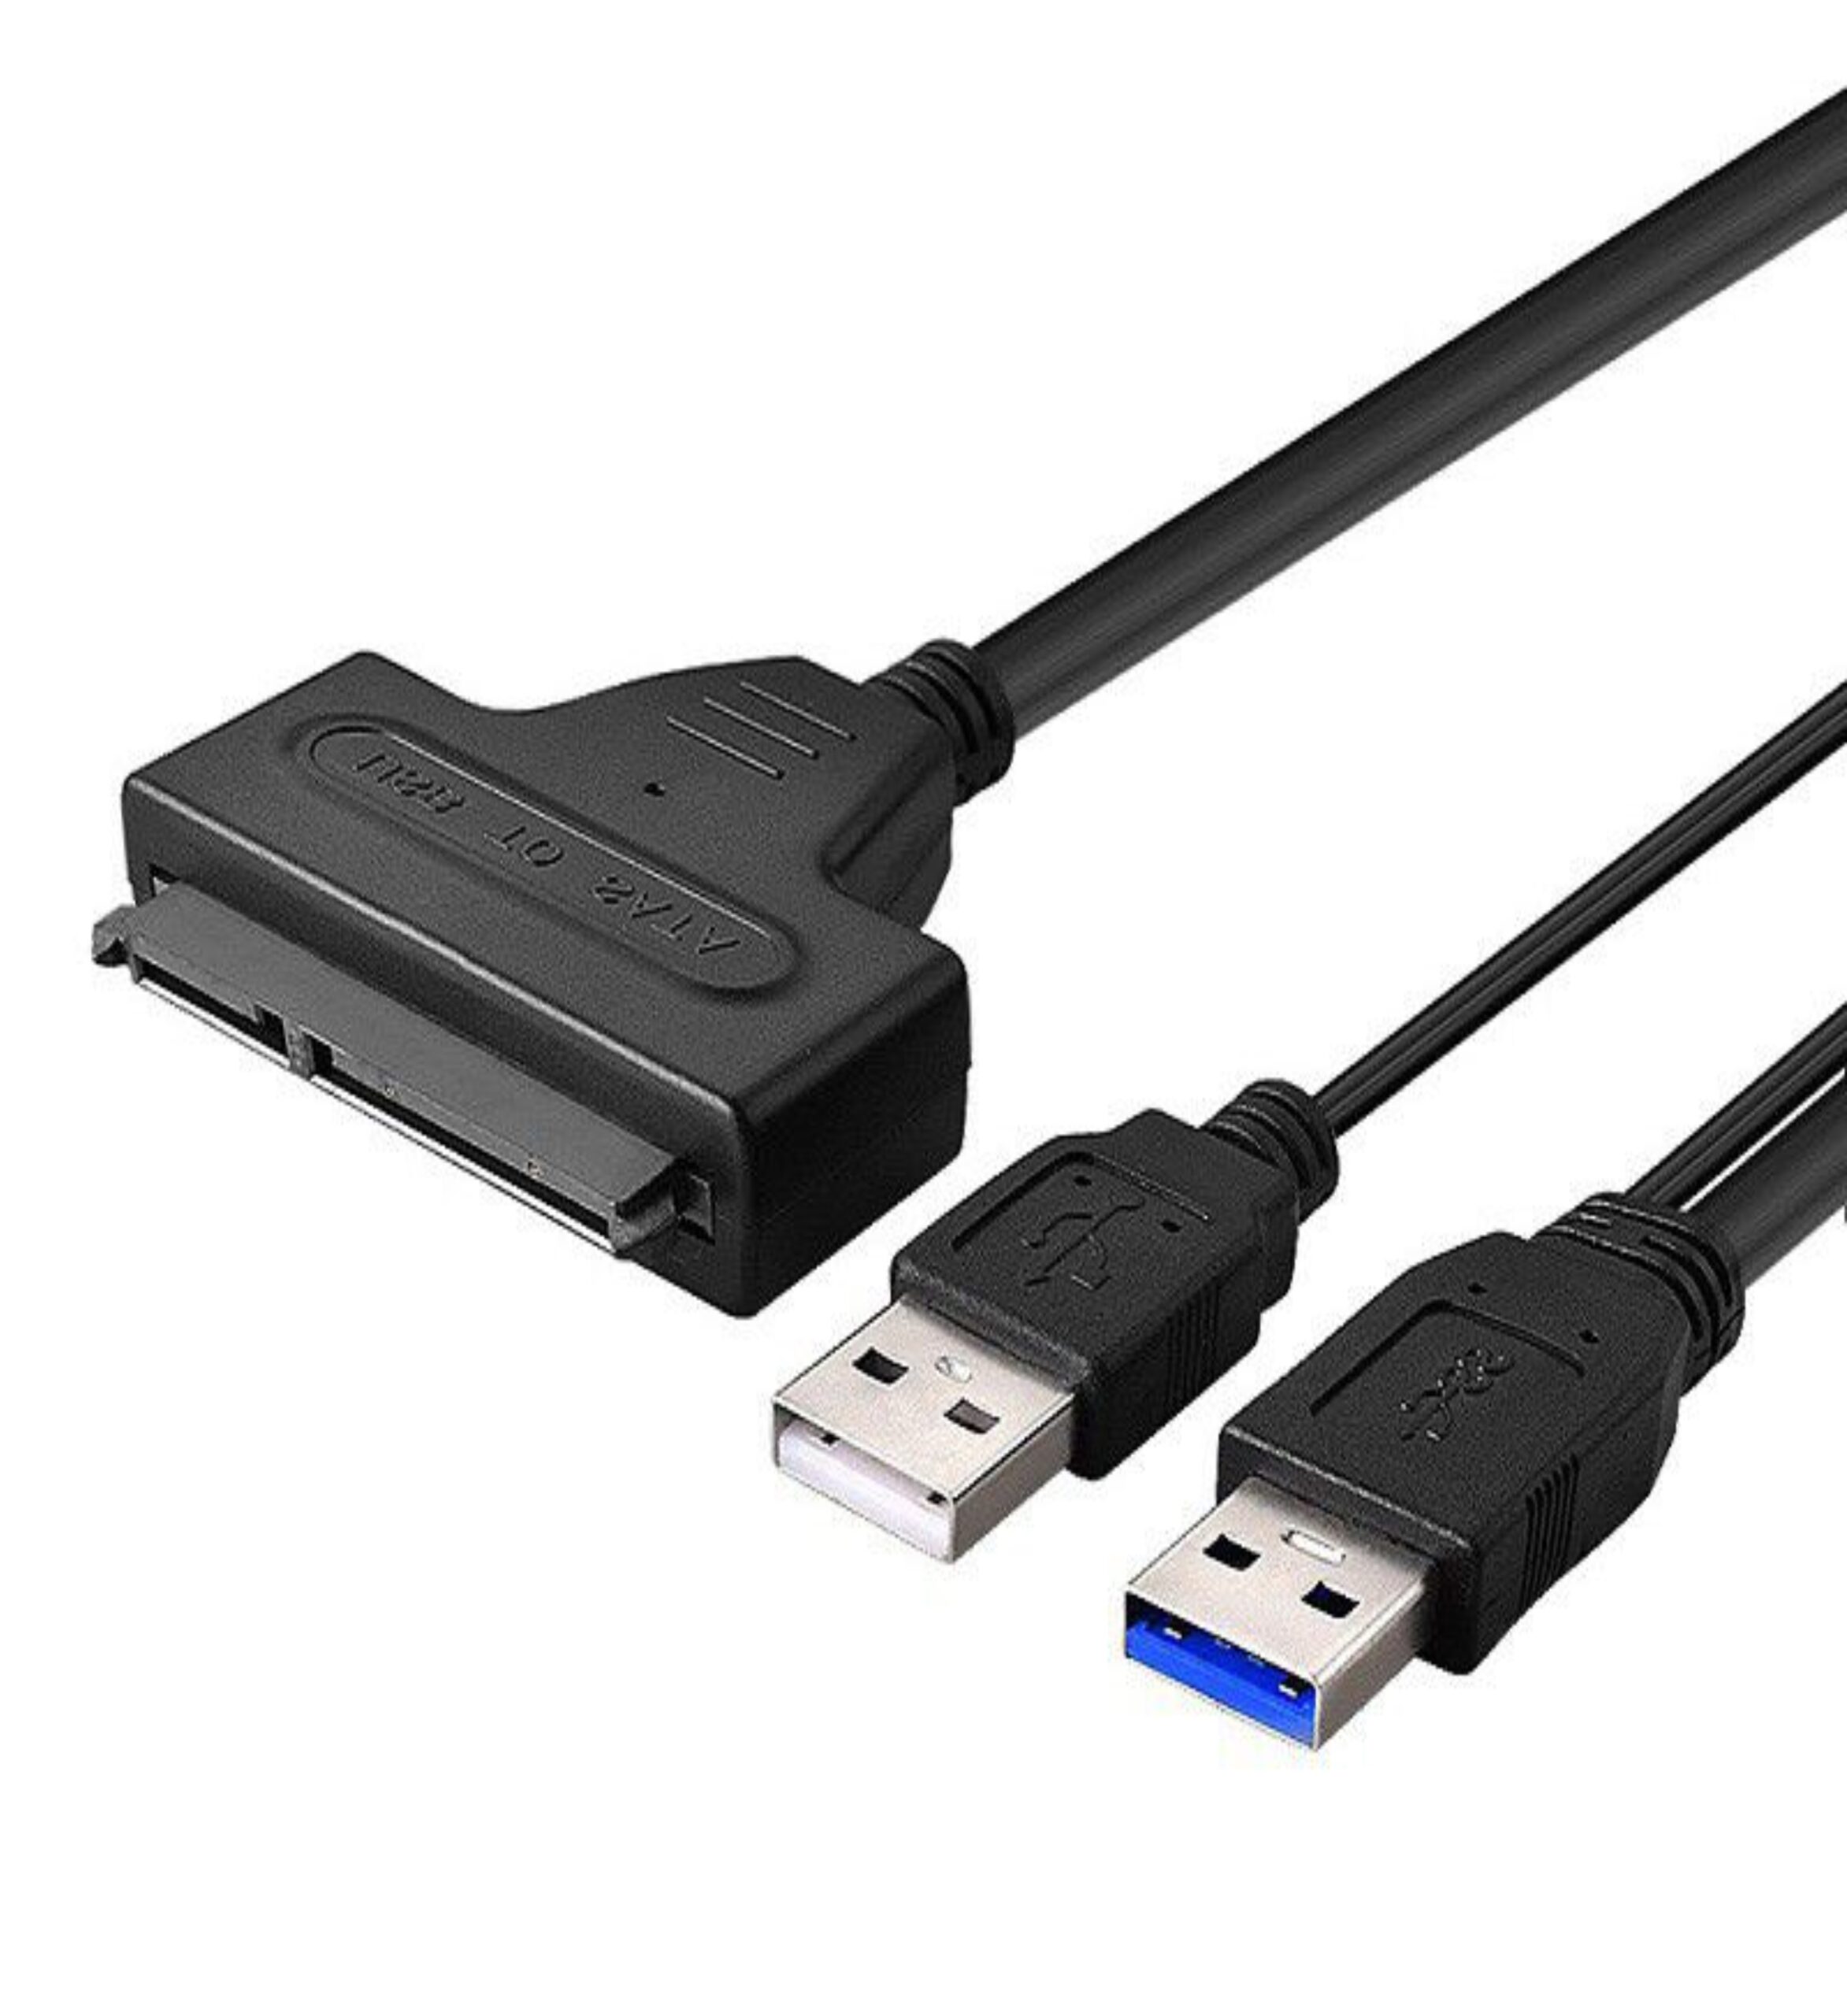 2STB USB 2.0 to sata cable hard disk drive converter – Ashcom Online